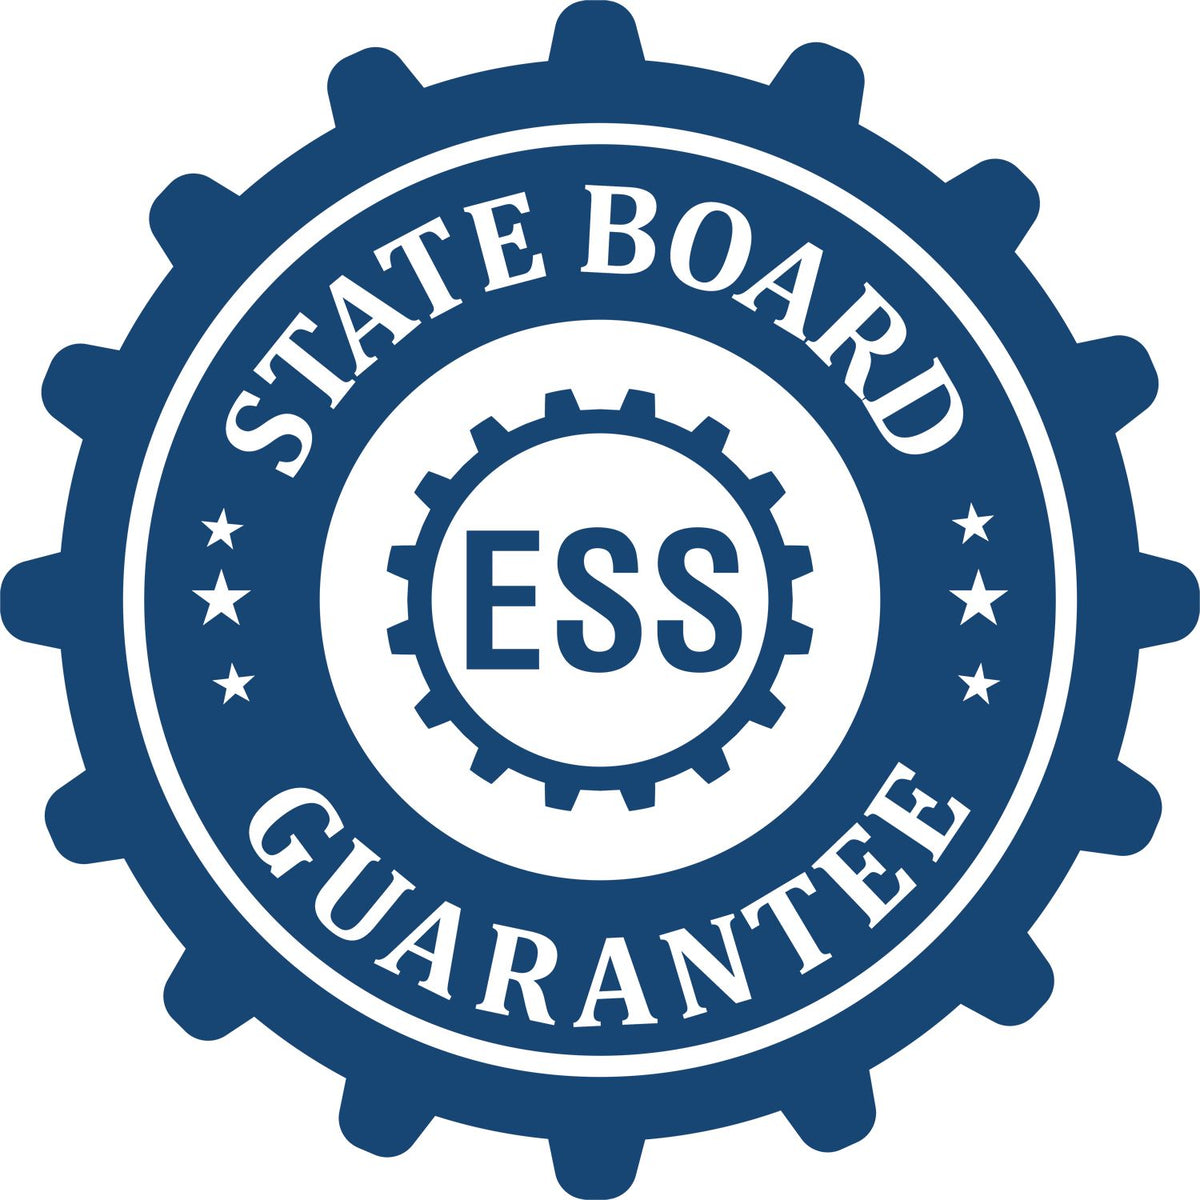 An emblem in a gear shape illustrating a state board guarantee for the Soft Missouri Professional Engineer Seal product.